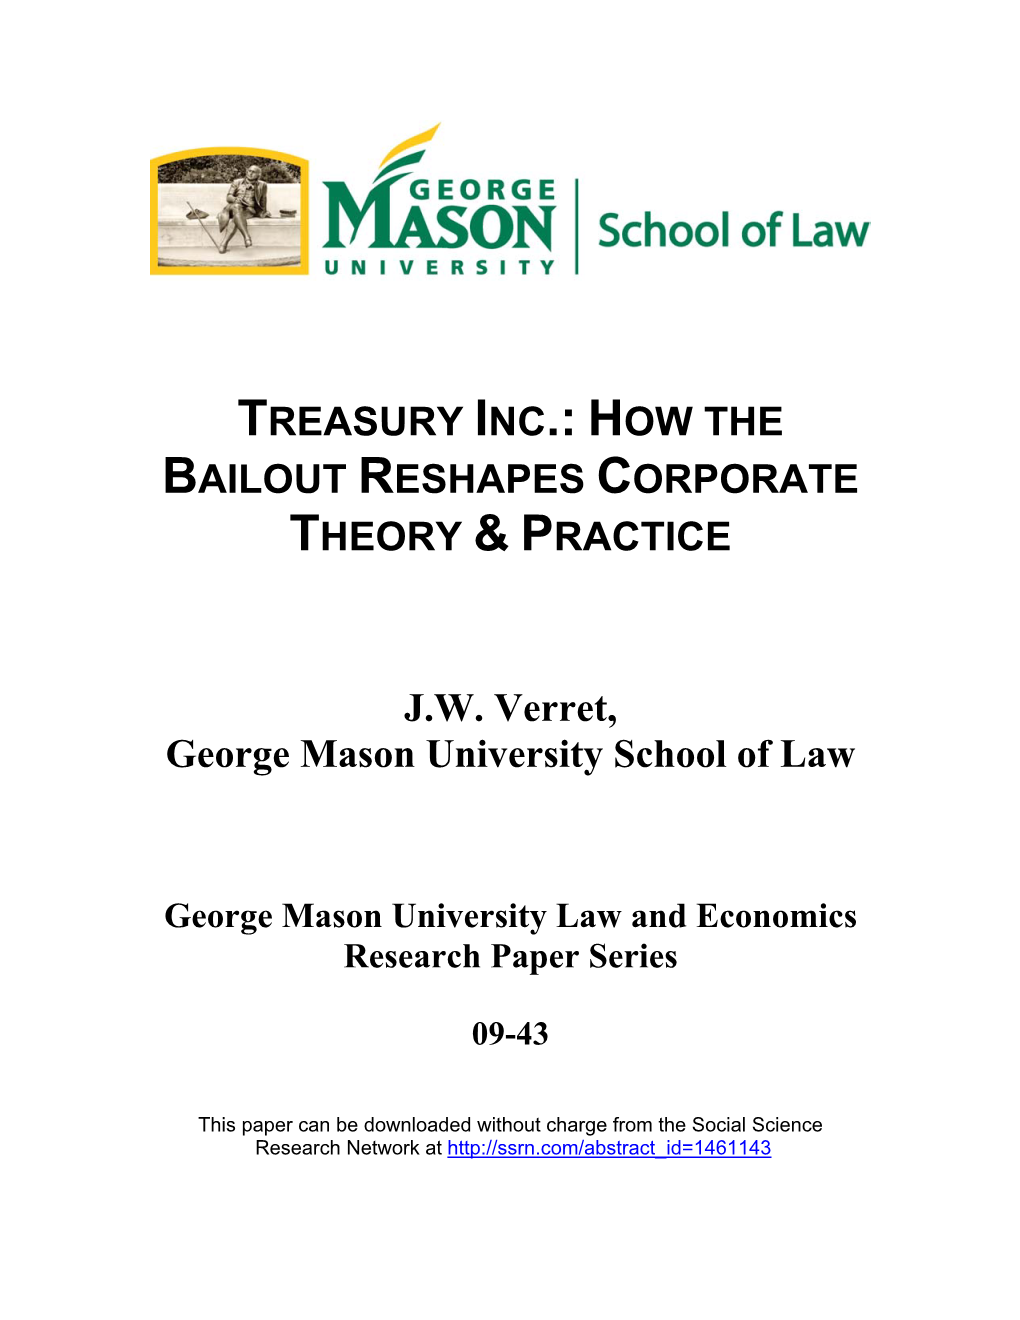 Treasury Inc.: How the Bailout Reshapes Corporate Theory & Practice